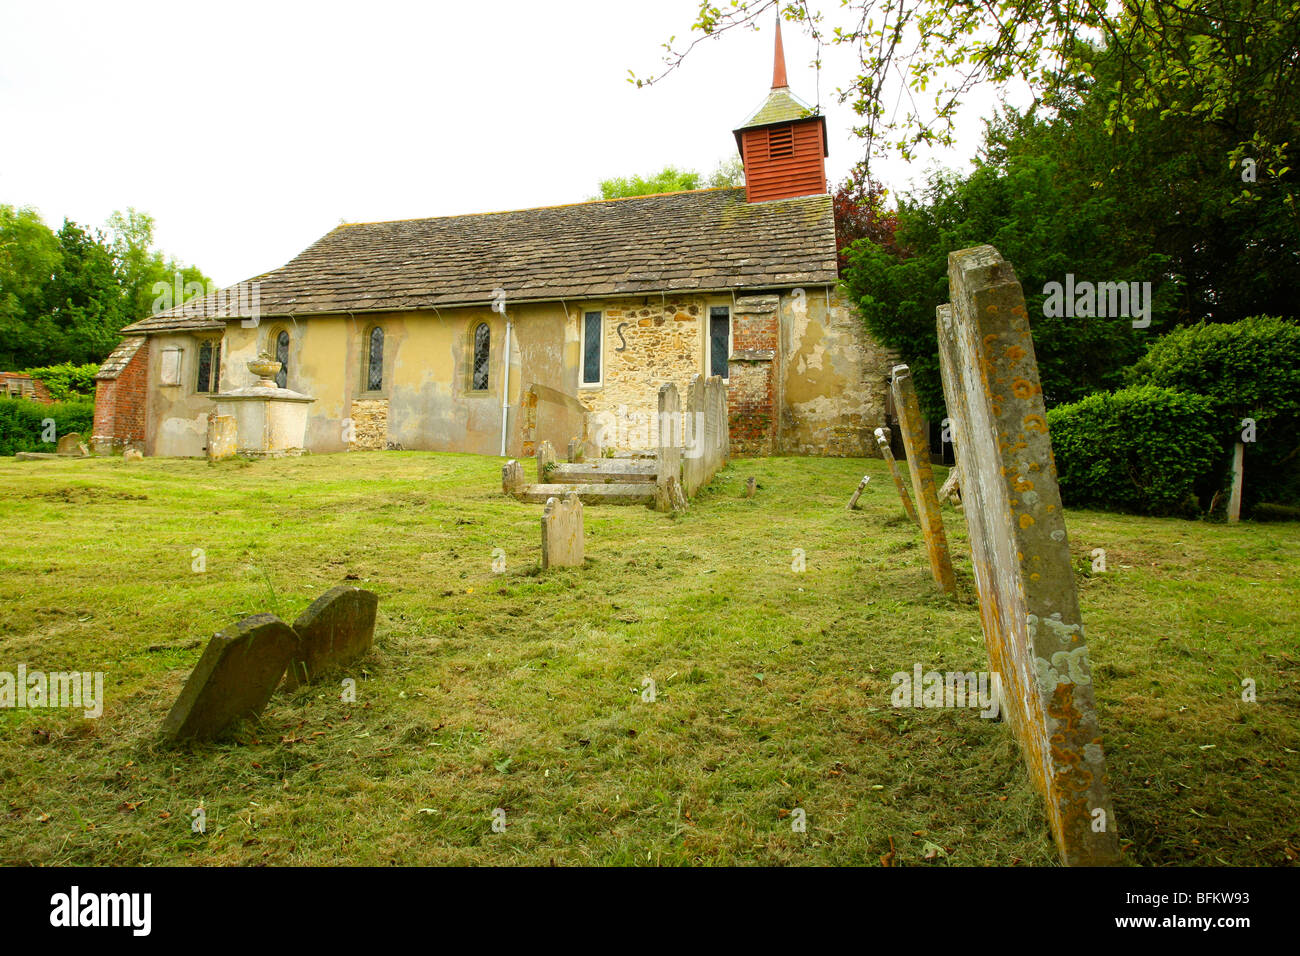 14th century church of St Giles in Shermanbury near Henfield in West Sussex UK is open periodically as it is on private land. Stock Photo